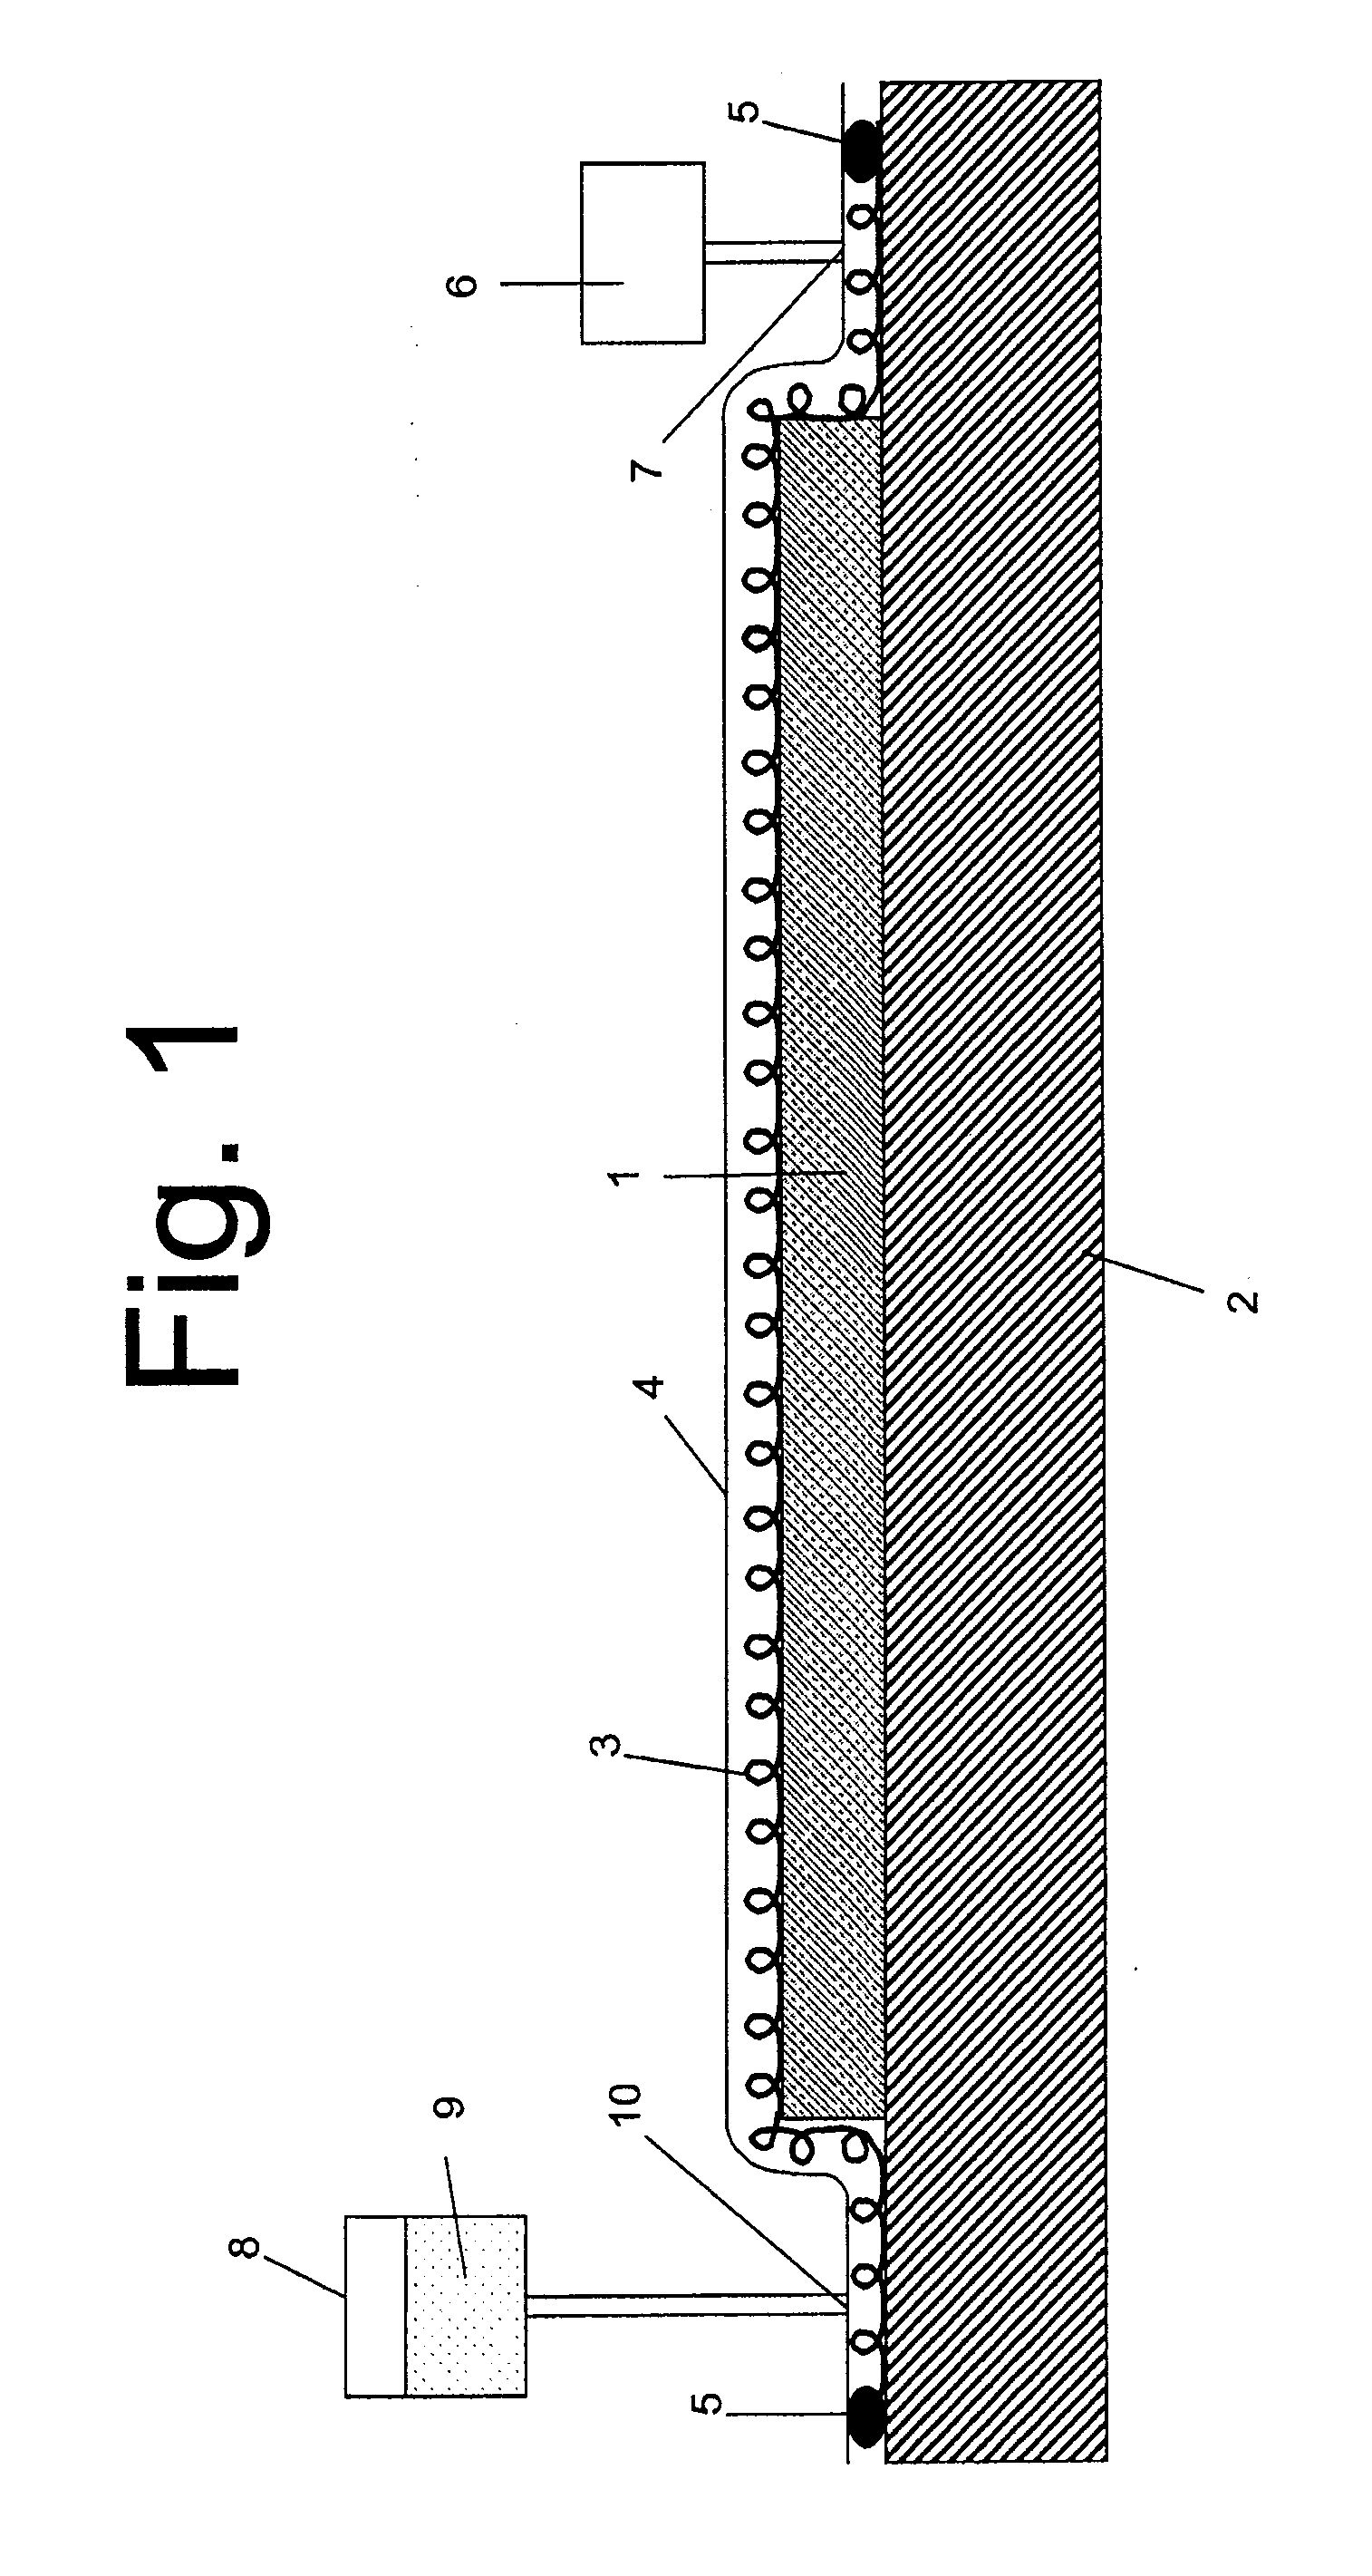 Method of processing a composite material